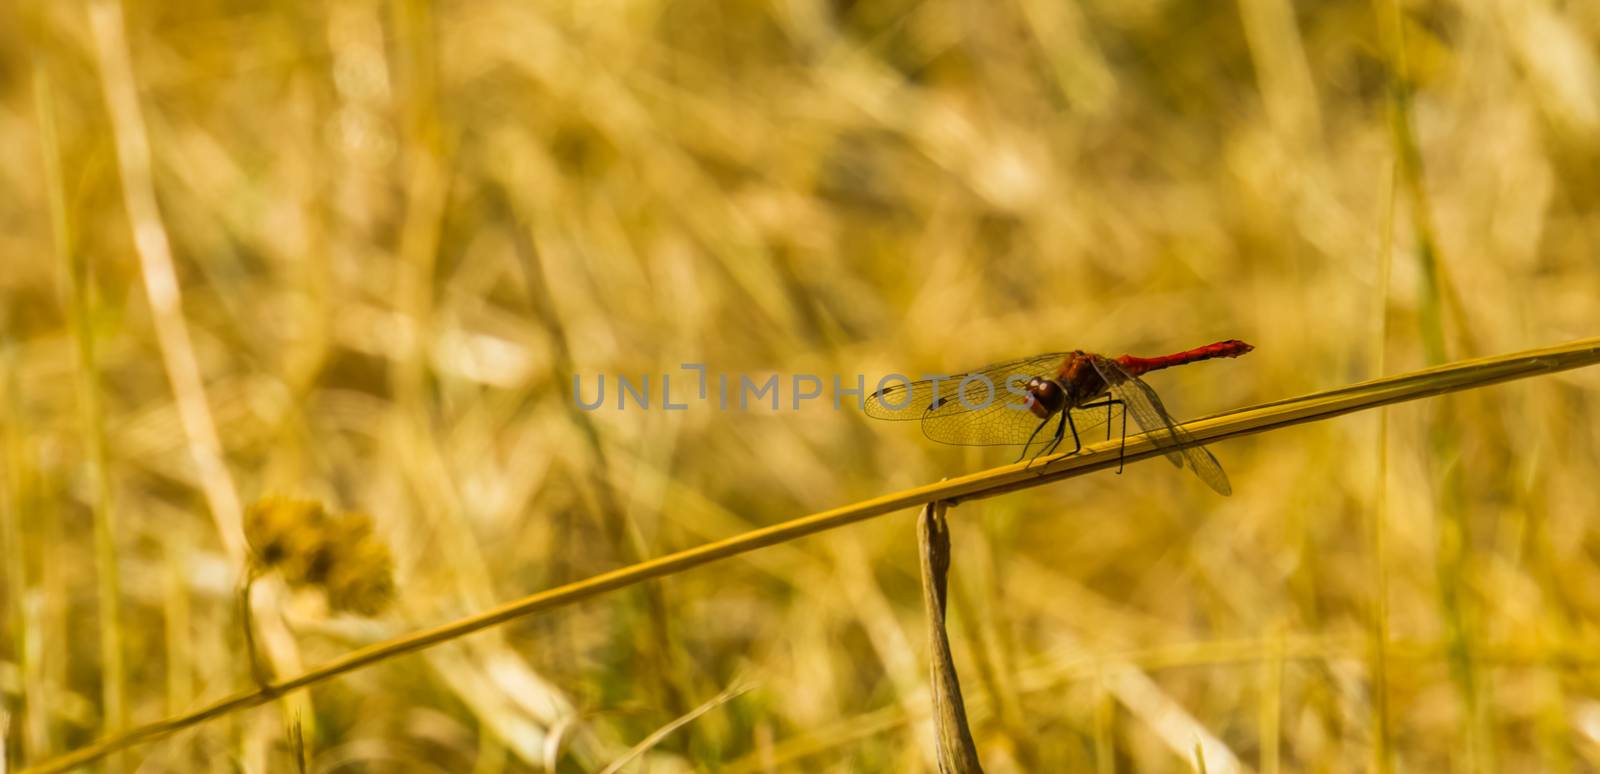 beautiful closeup of a ruddy darter sitting on a blade of grass, fire red dragonfly, common insect specie from Europe